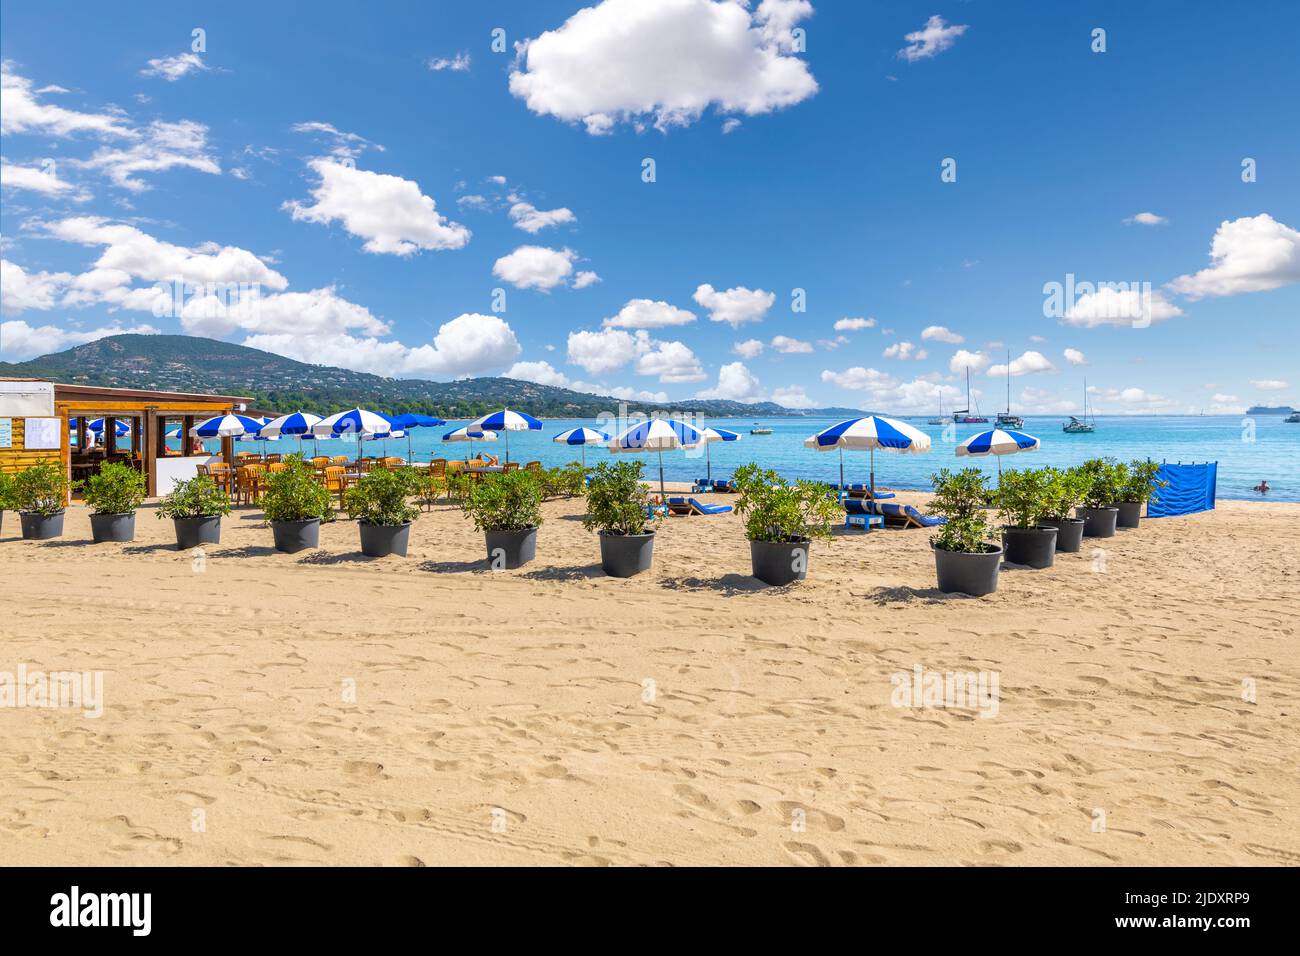 Chairs, lounges and umbrellas along the French Riviera at the sandy beach of Port Grimaud, France, near Saint-Tropez along the Mediterranean Sea. Stock Photo